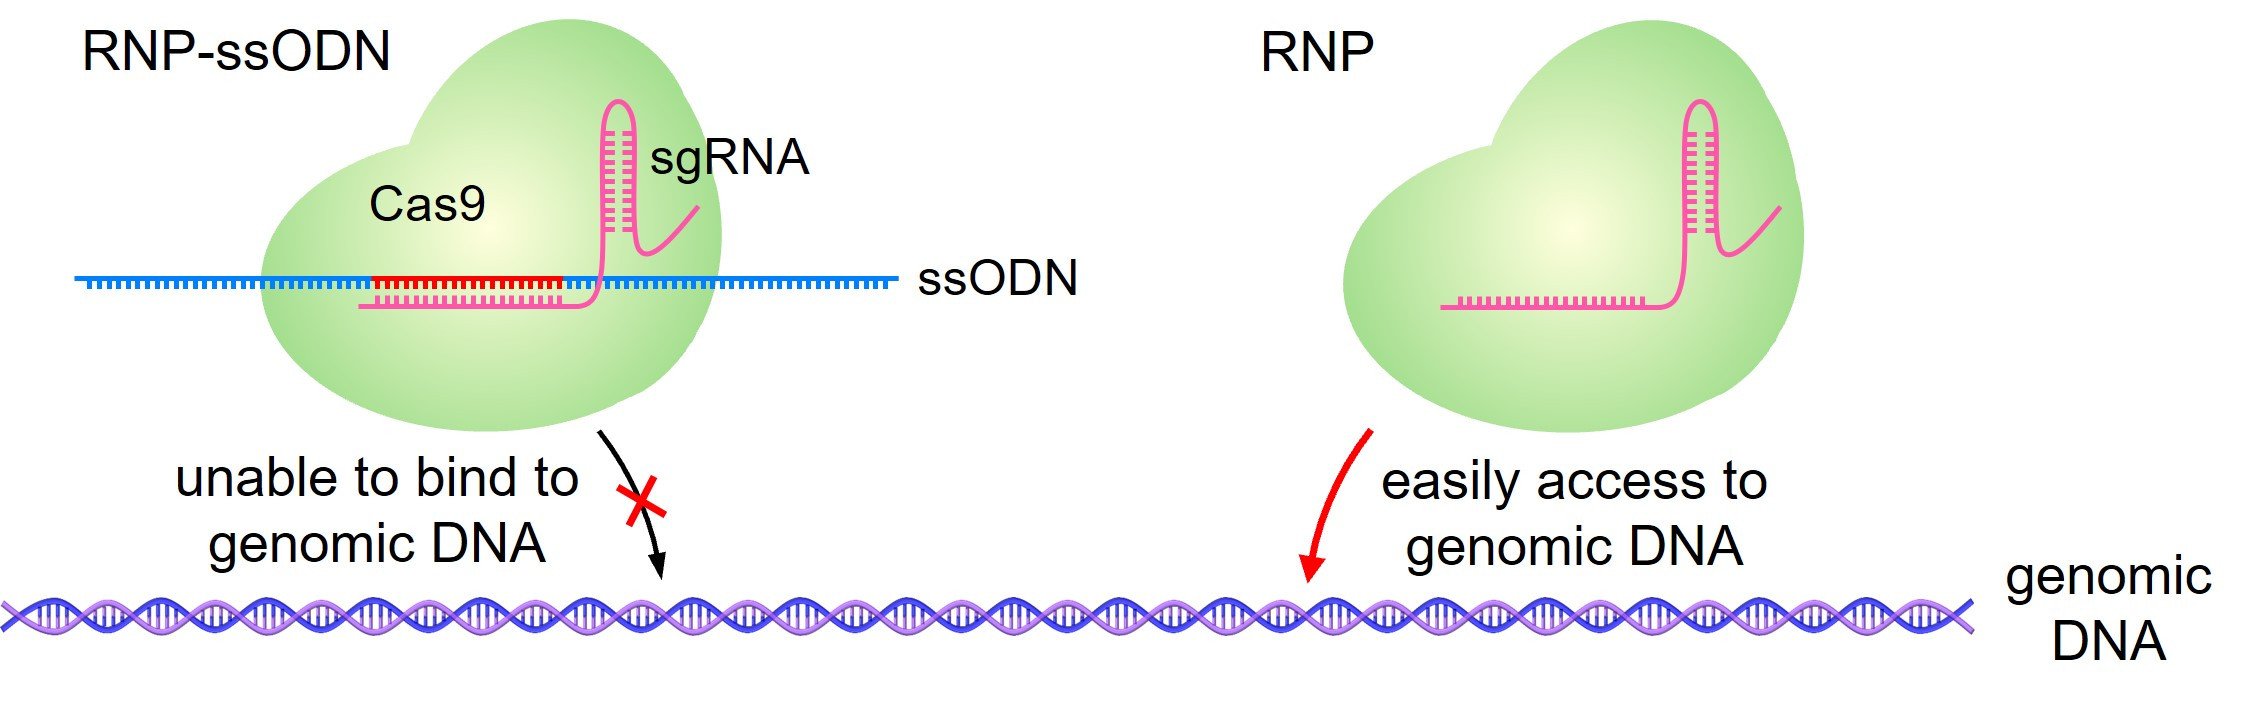 RNP-ssODN is designed to ensure the CRISPR-Cas9 molecule is encapsulated by the liquid nanoparticle